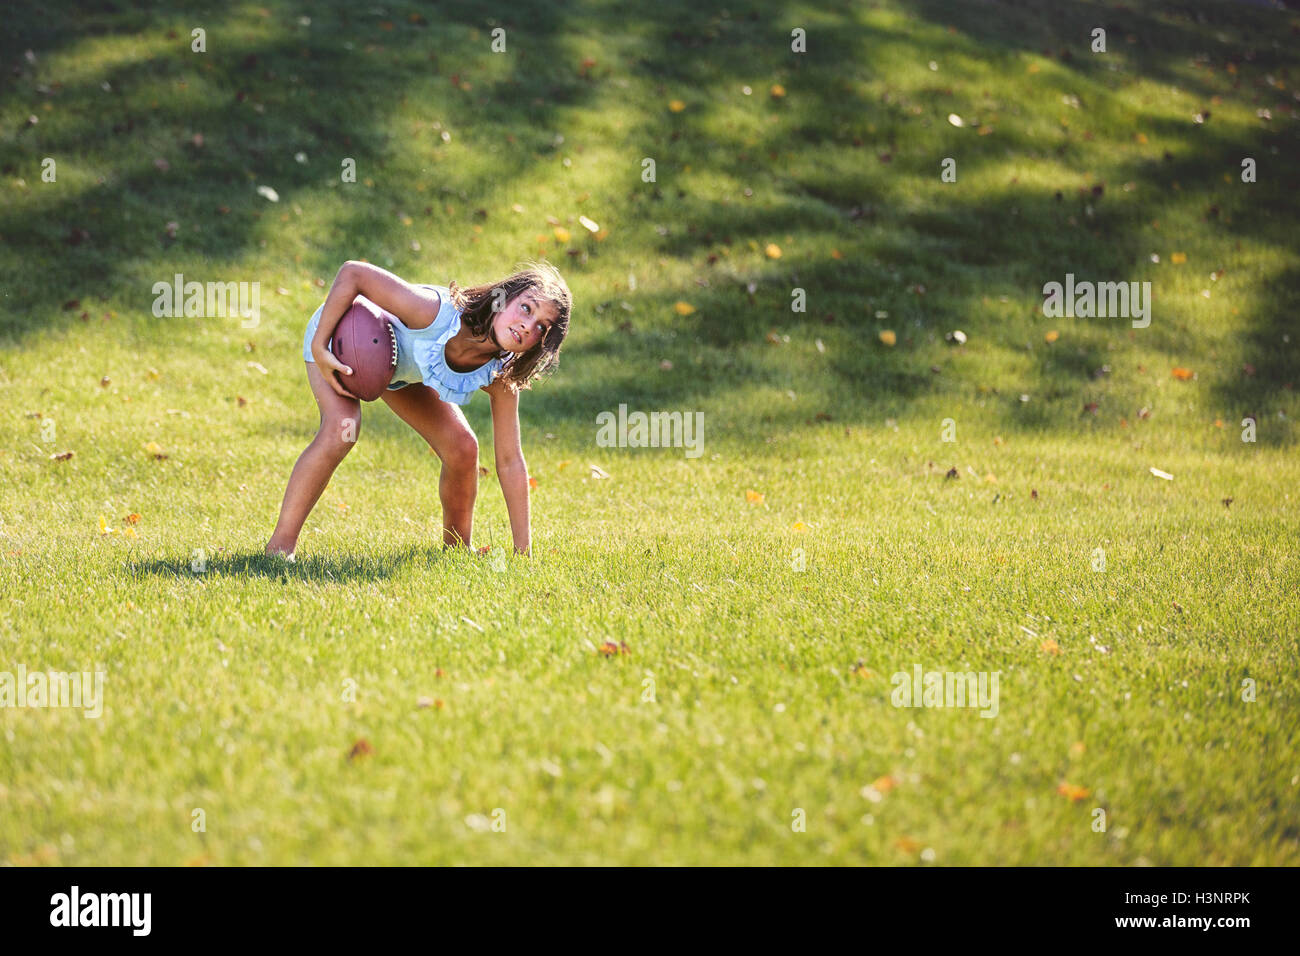 Girl bending forward playing American football in park Stock Photo